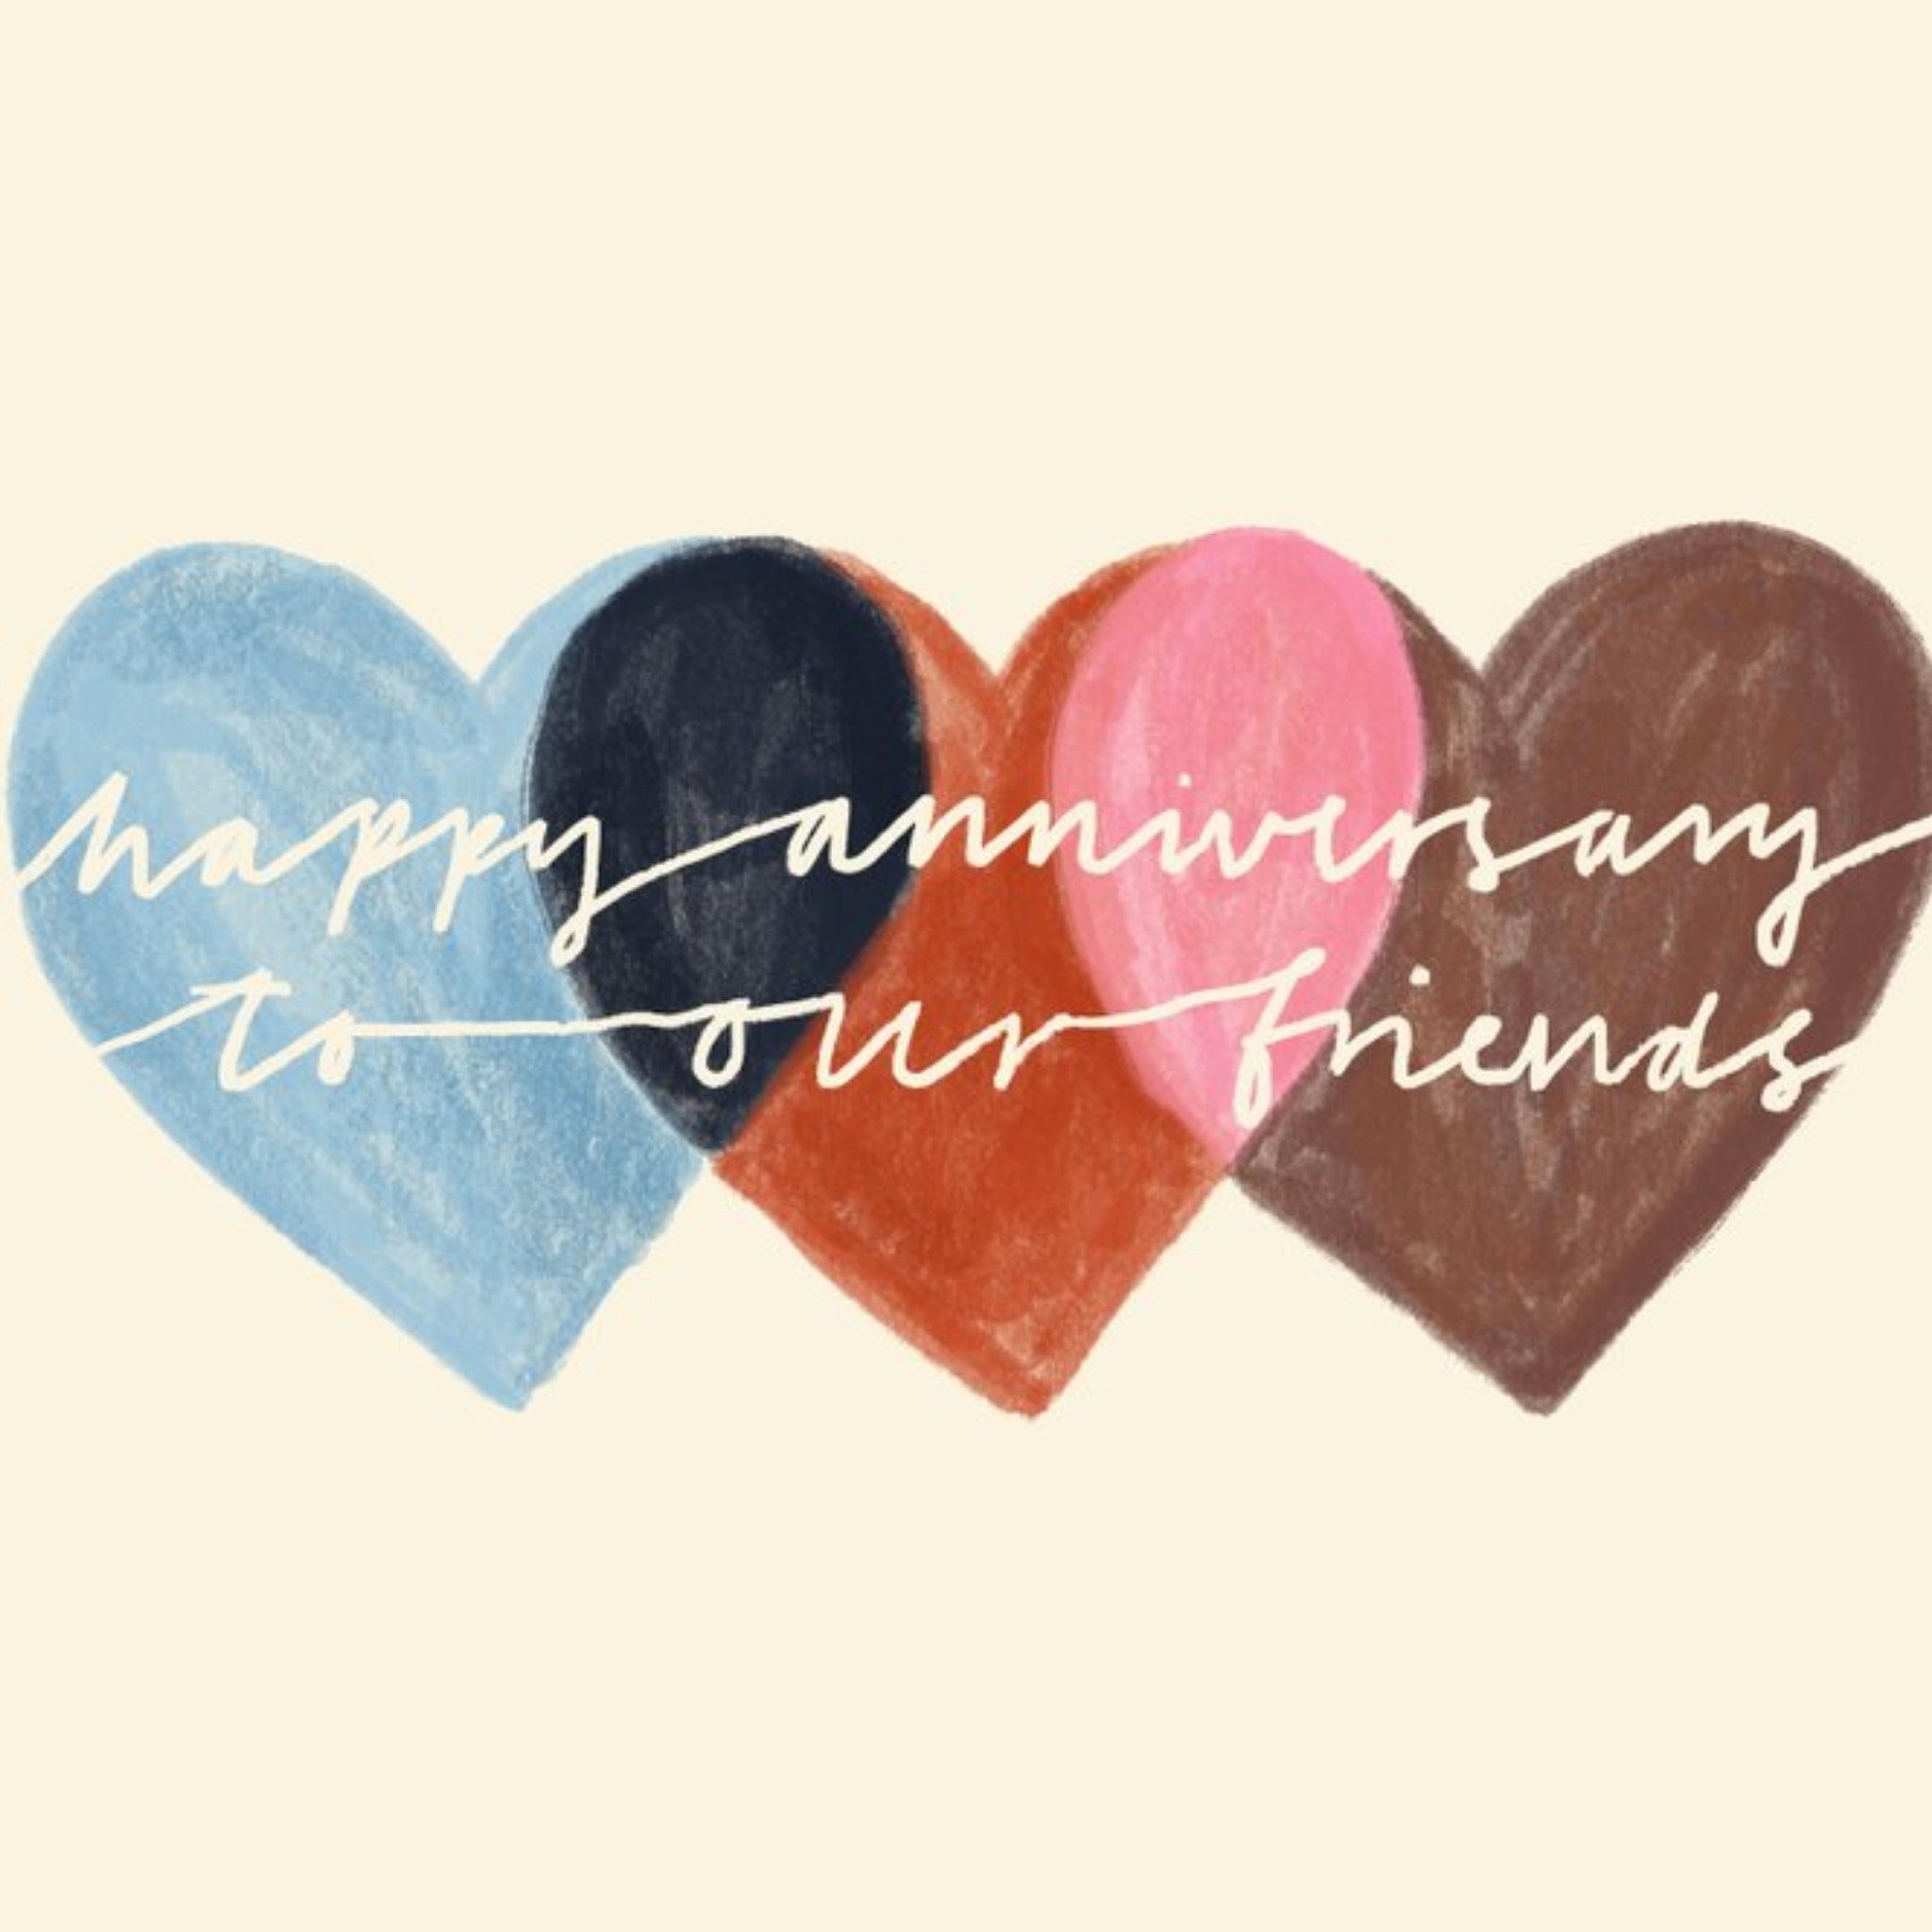 Moonpig Katy Welsh Hearts To Our Friends Happy Anniversary Card, Square